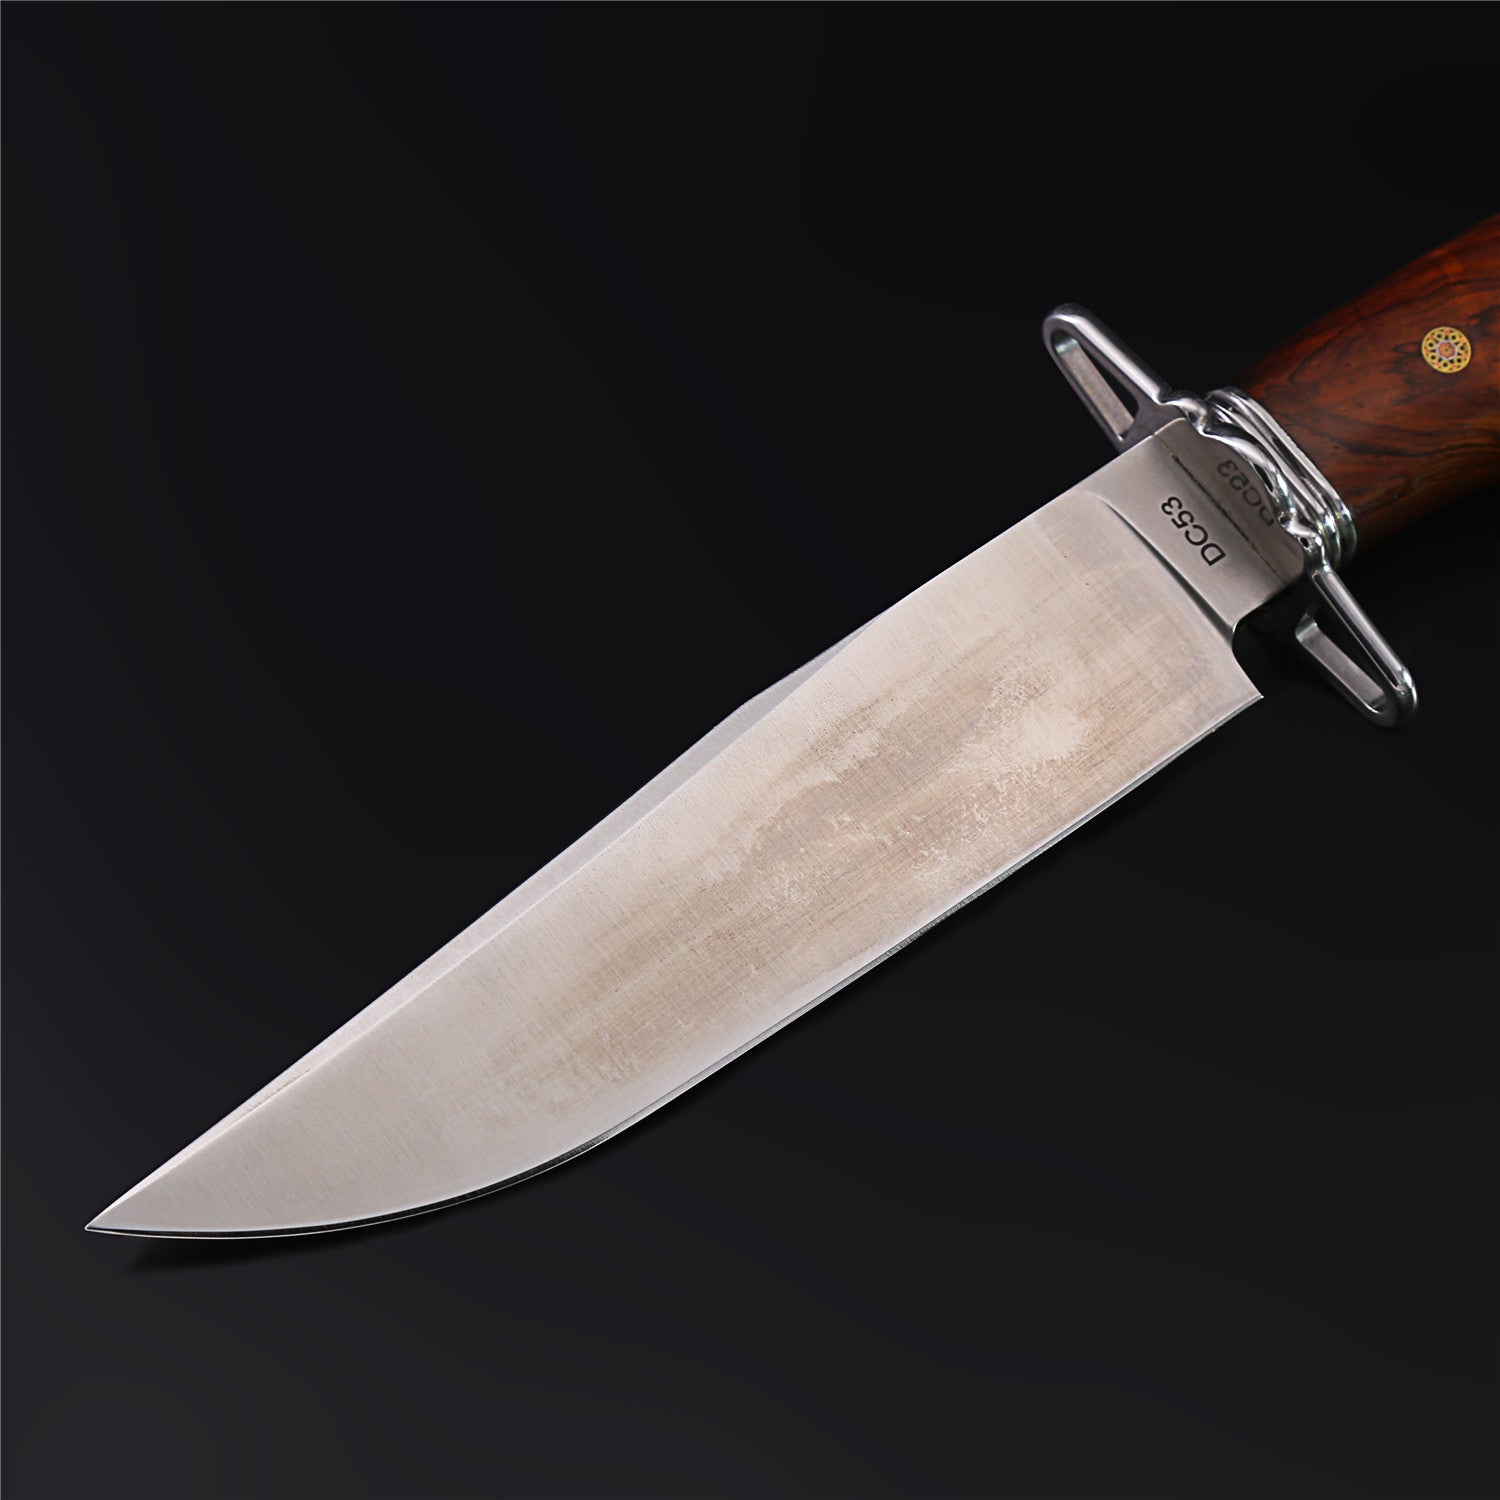 The Hammer DC53 Steel Fixed Blade